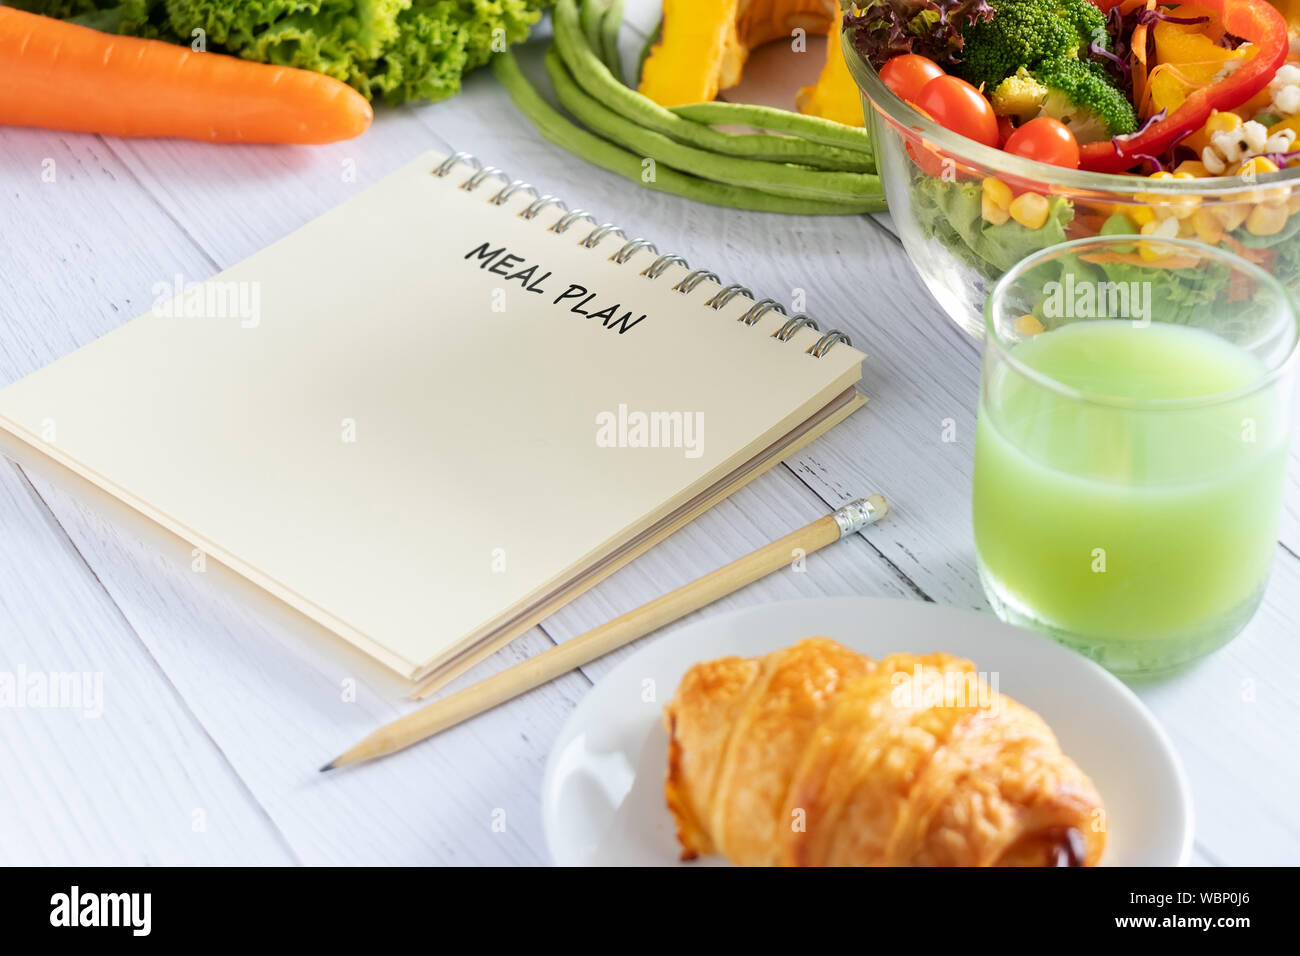 Calories control, meal plan, food diet and weight loss concept. meal plan writing on notebook planner with salad, fruit juice, bread and vegetable Stock Photo